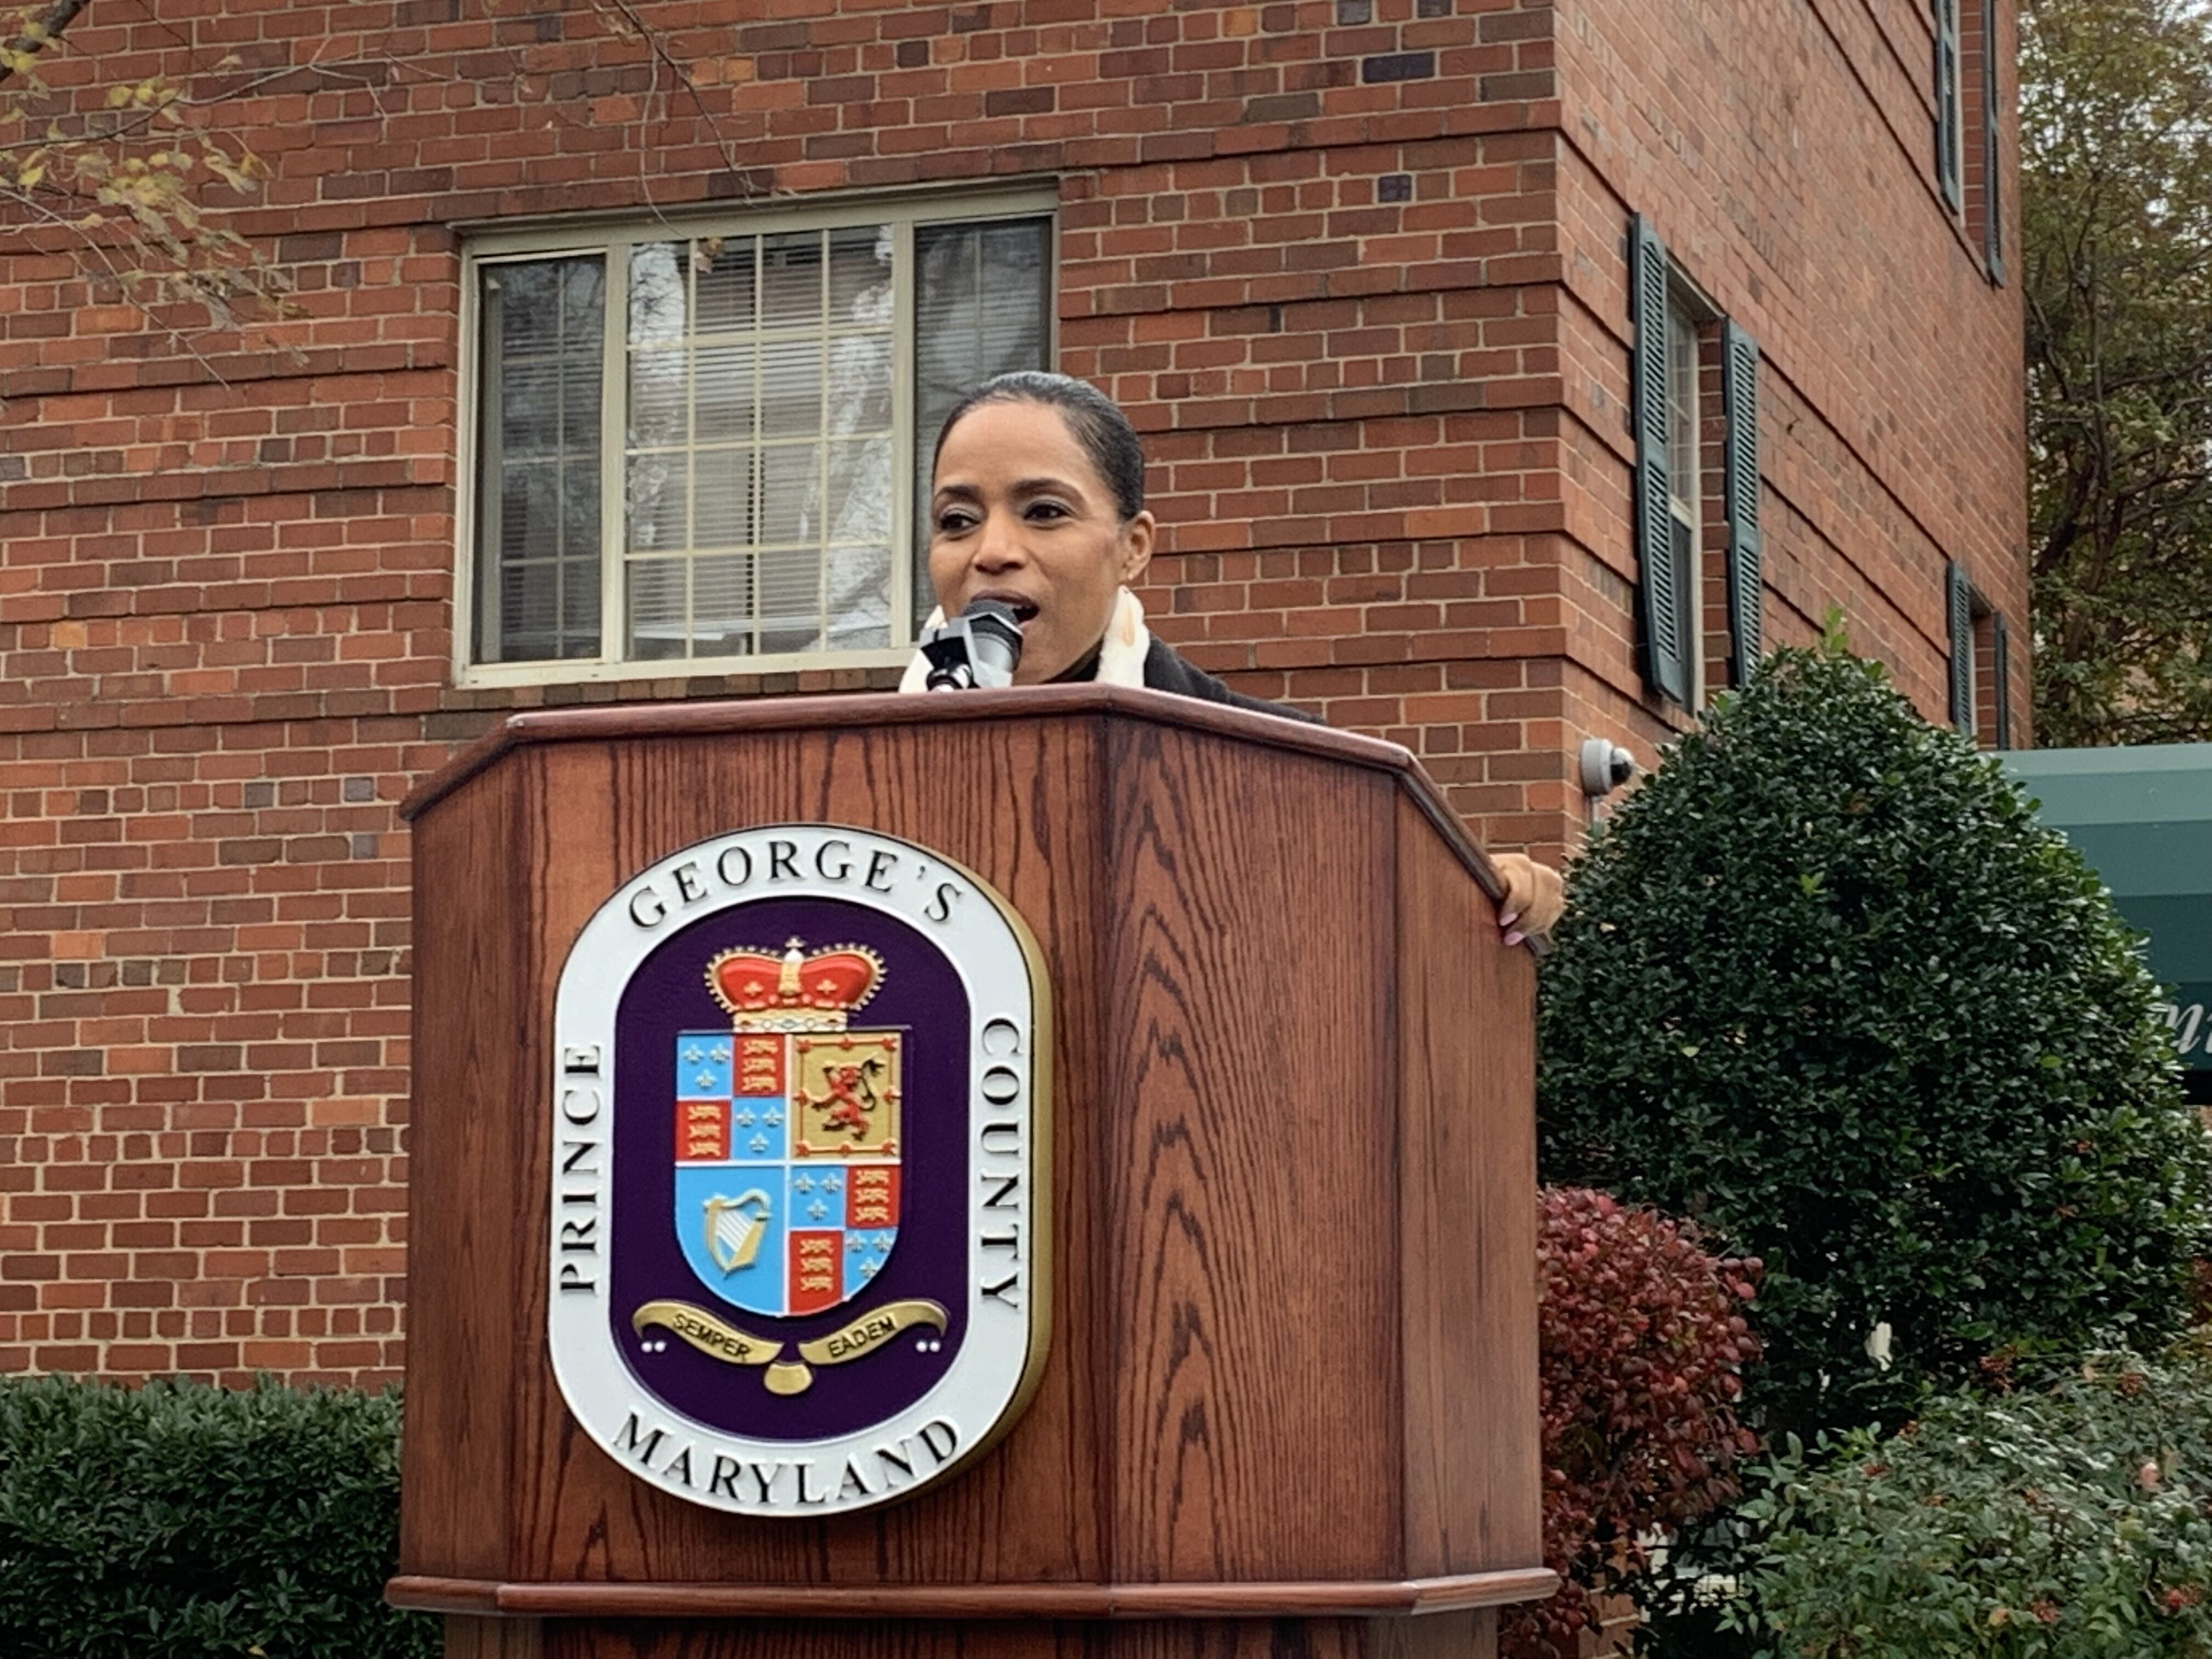 Prince George's County Executive Angela Alsobrooks at Hamilton Manor Apartments in Hyattsville, Md.